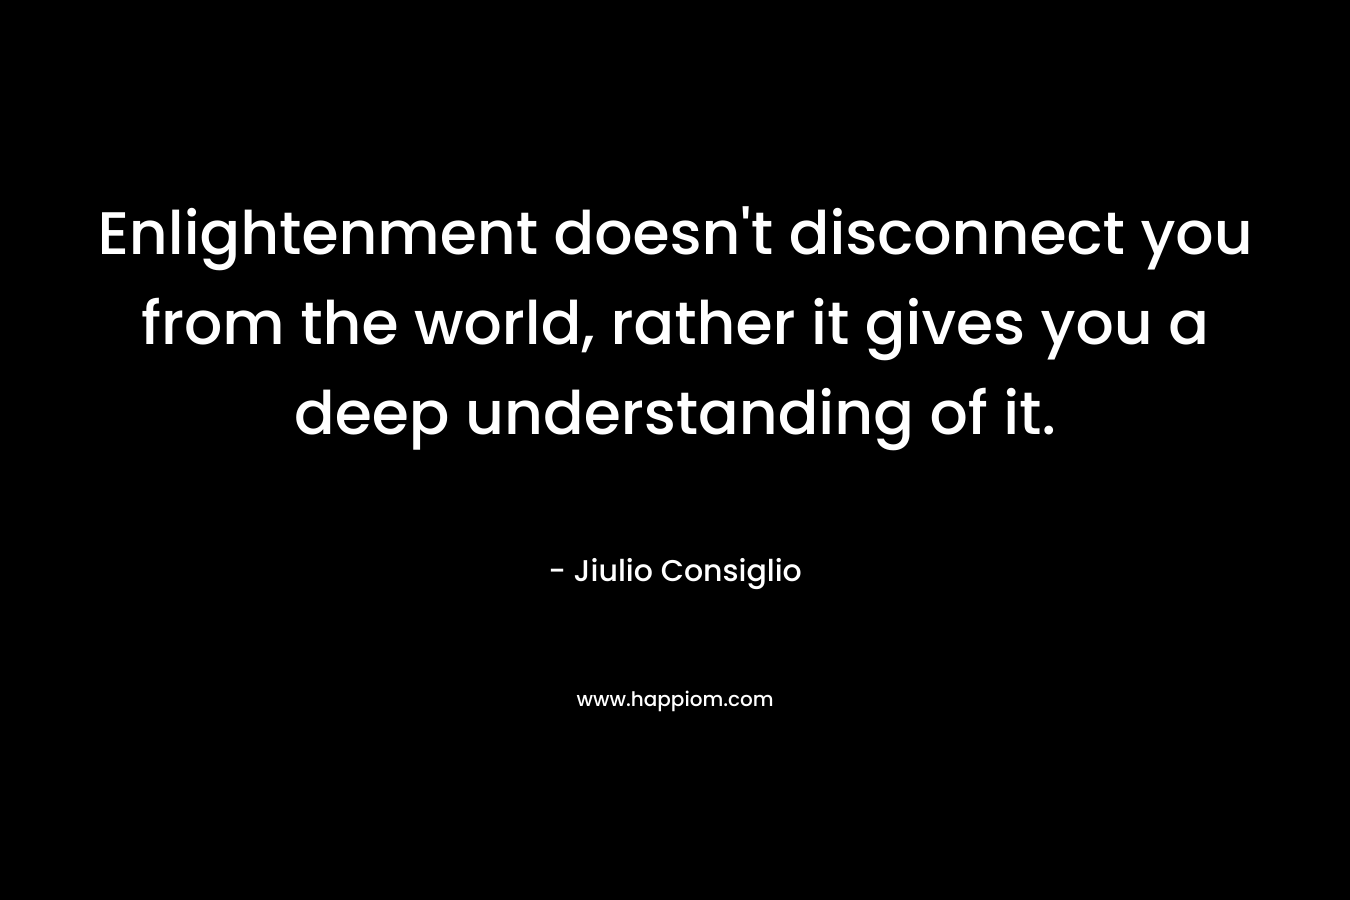 Enlightenment doesn’t disconnect you from the world, rather it gives you a deep understanding of it. – Jiulio Consiglio